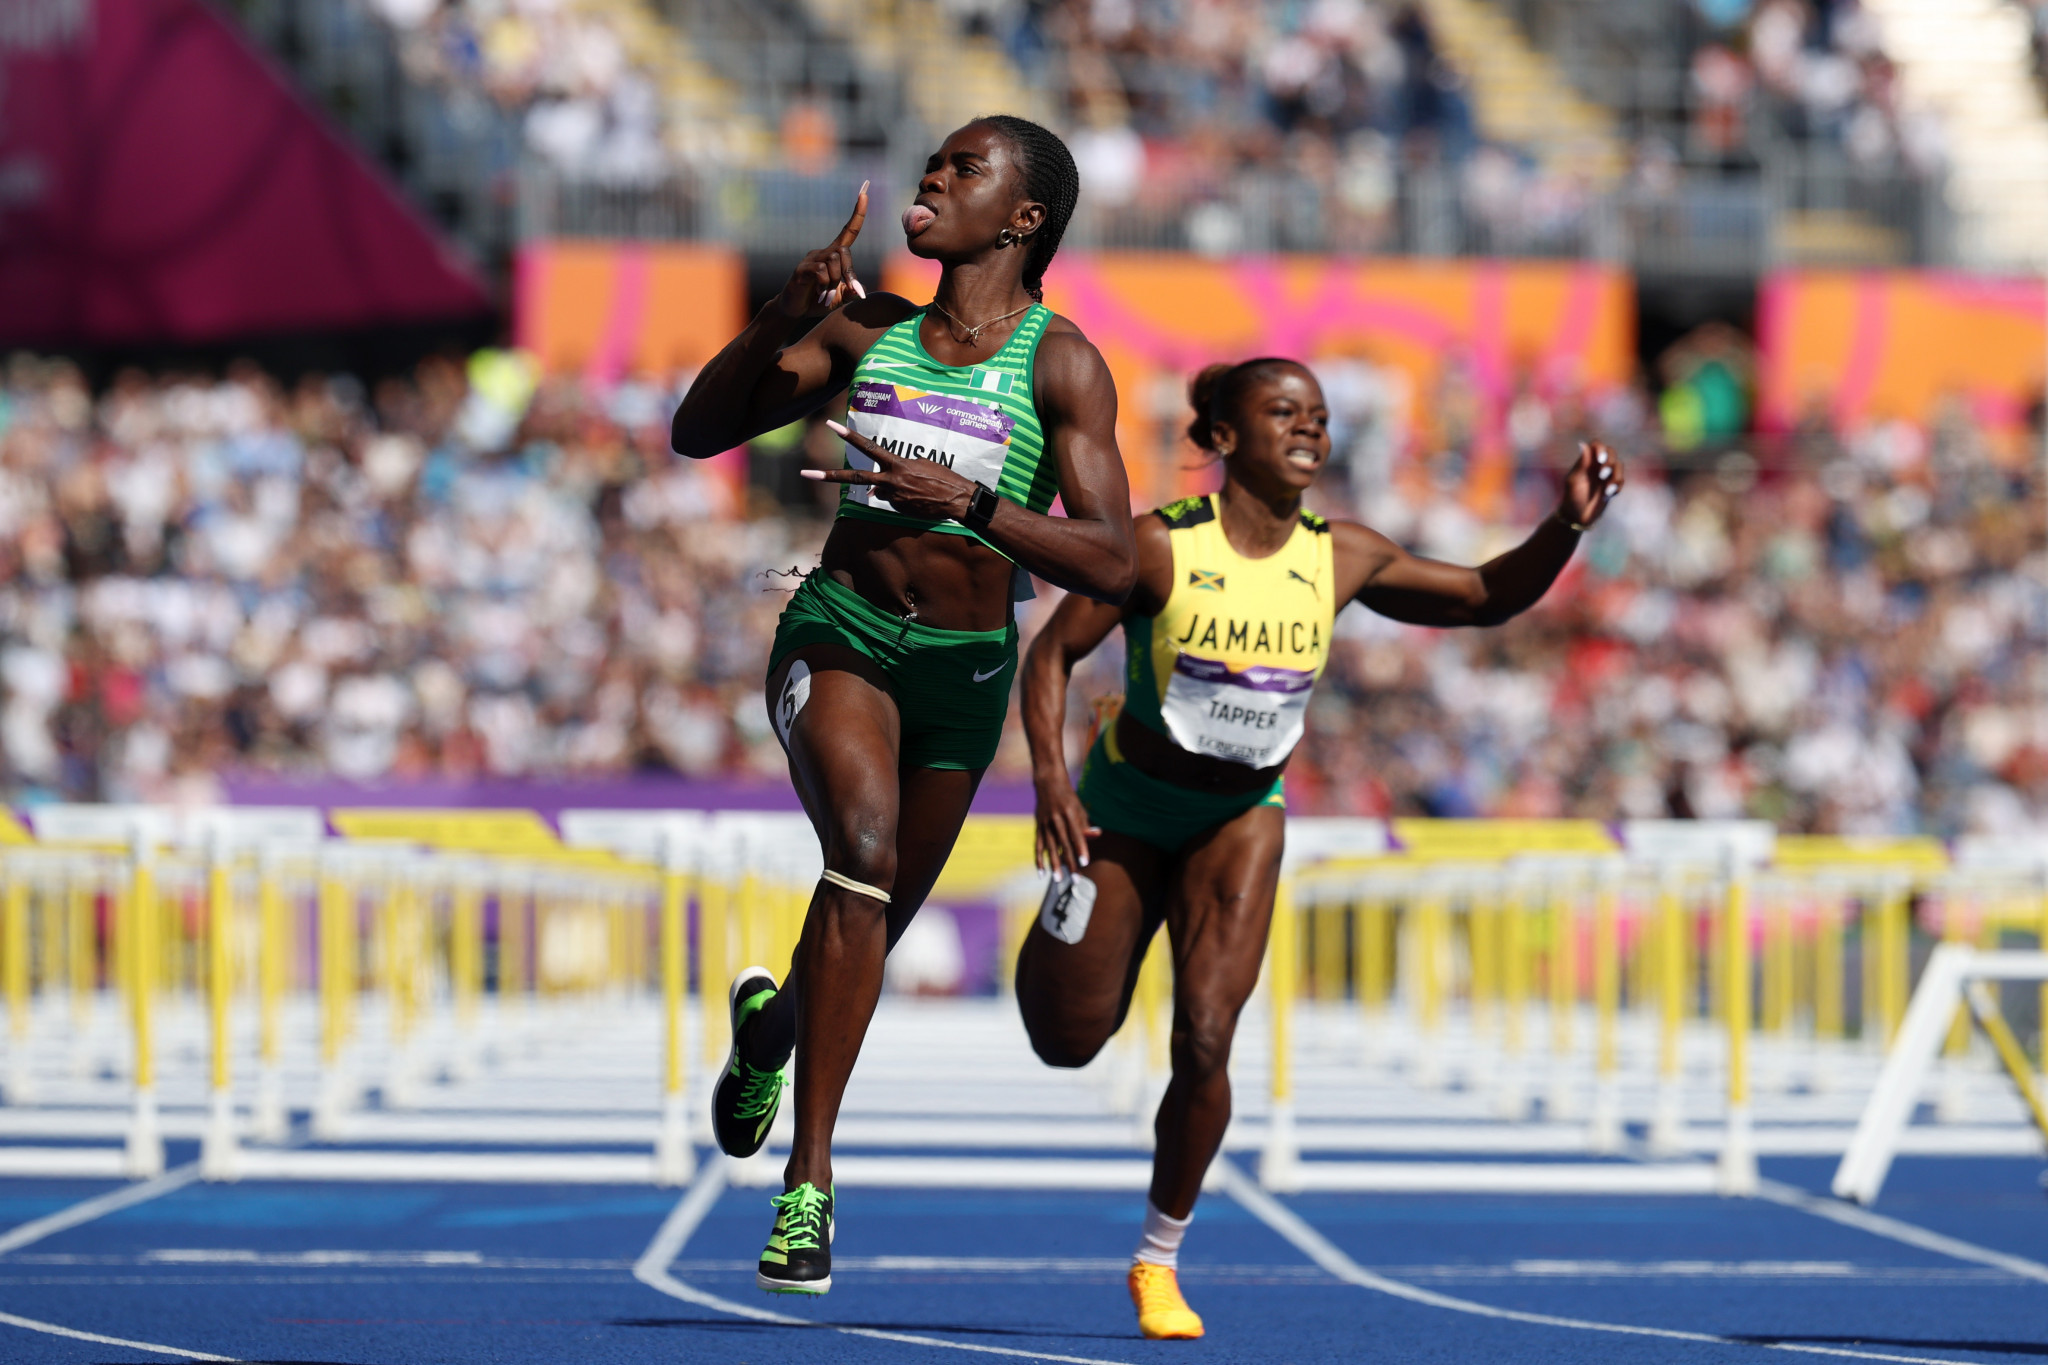 Nigeria's Tobi Amusan who won women's 100m hurdles gold at the World Championships backed it up with another win Birmingham ©Getty Images 